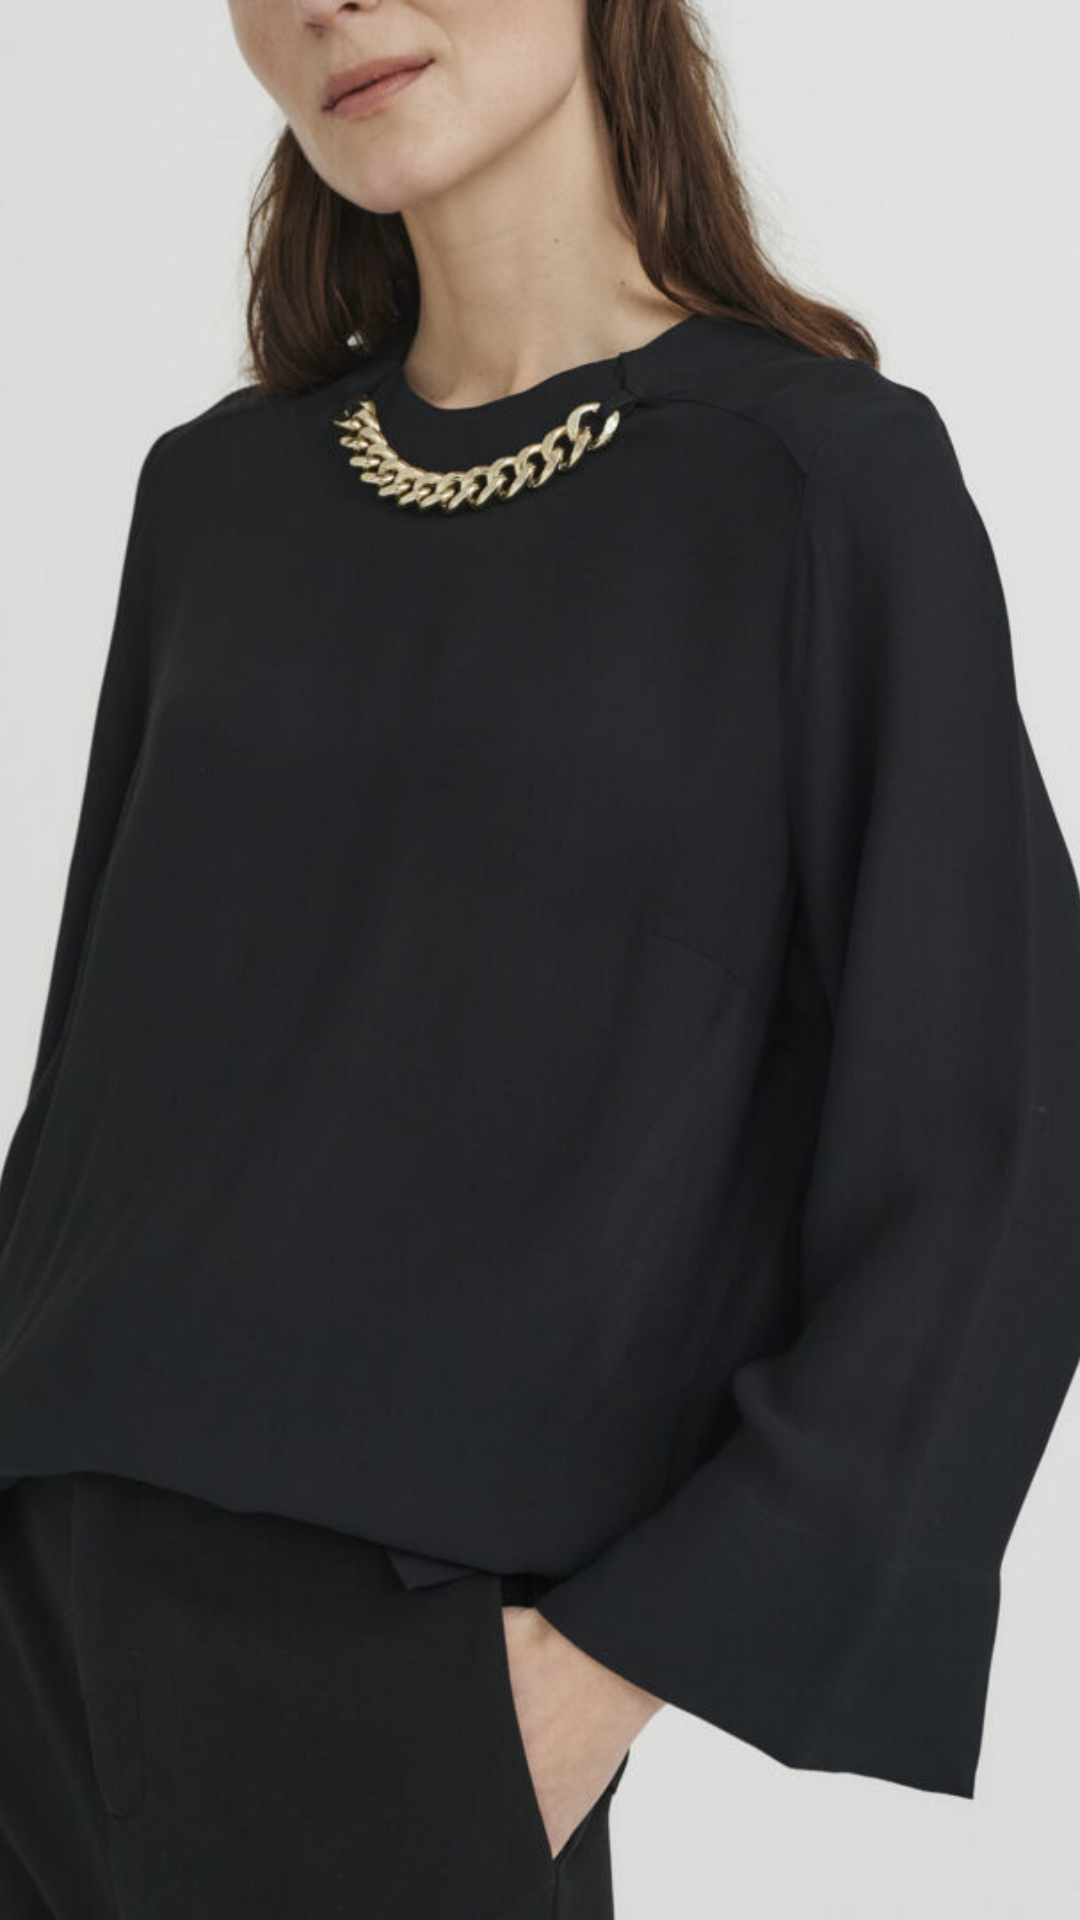 InWear Acelynn Black Blouse with Gold Chain - Jezabel Boutique